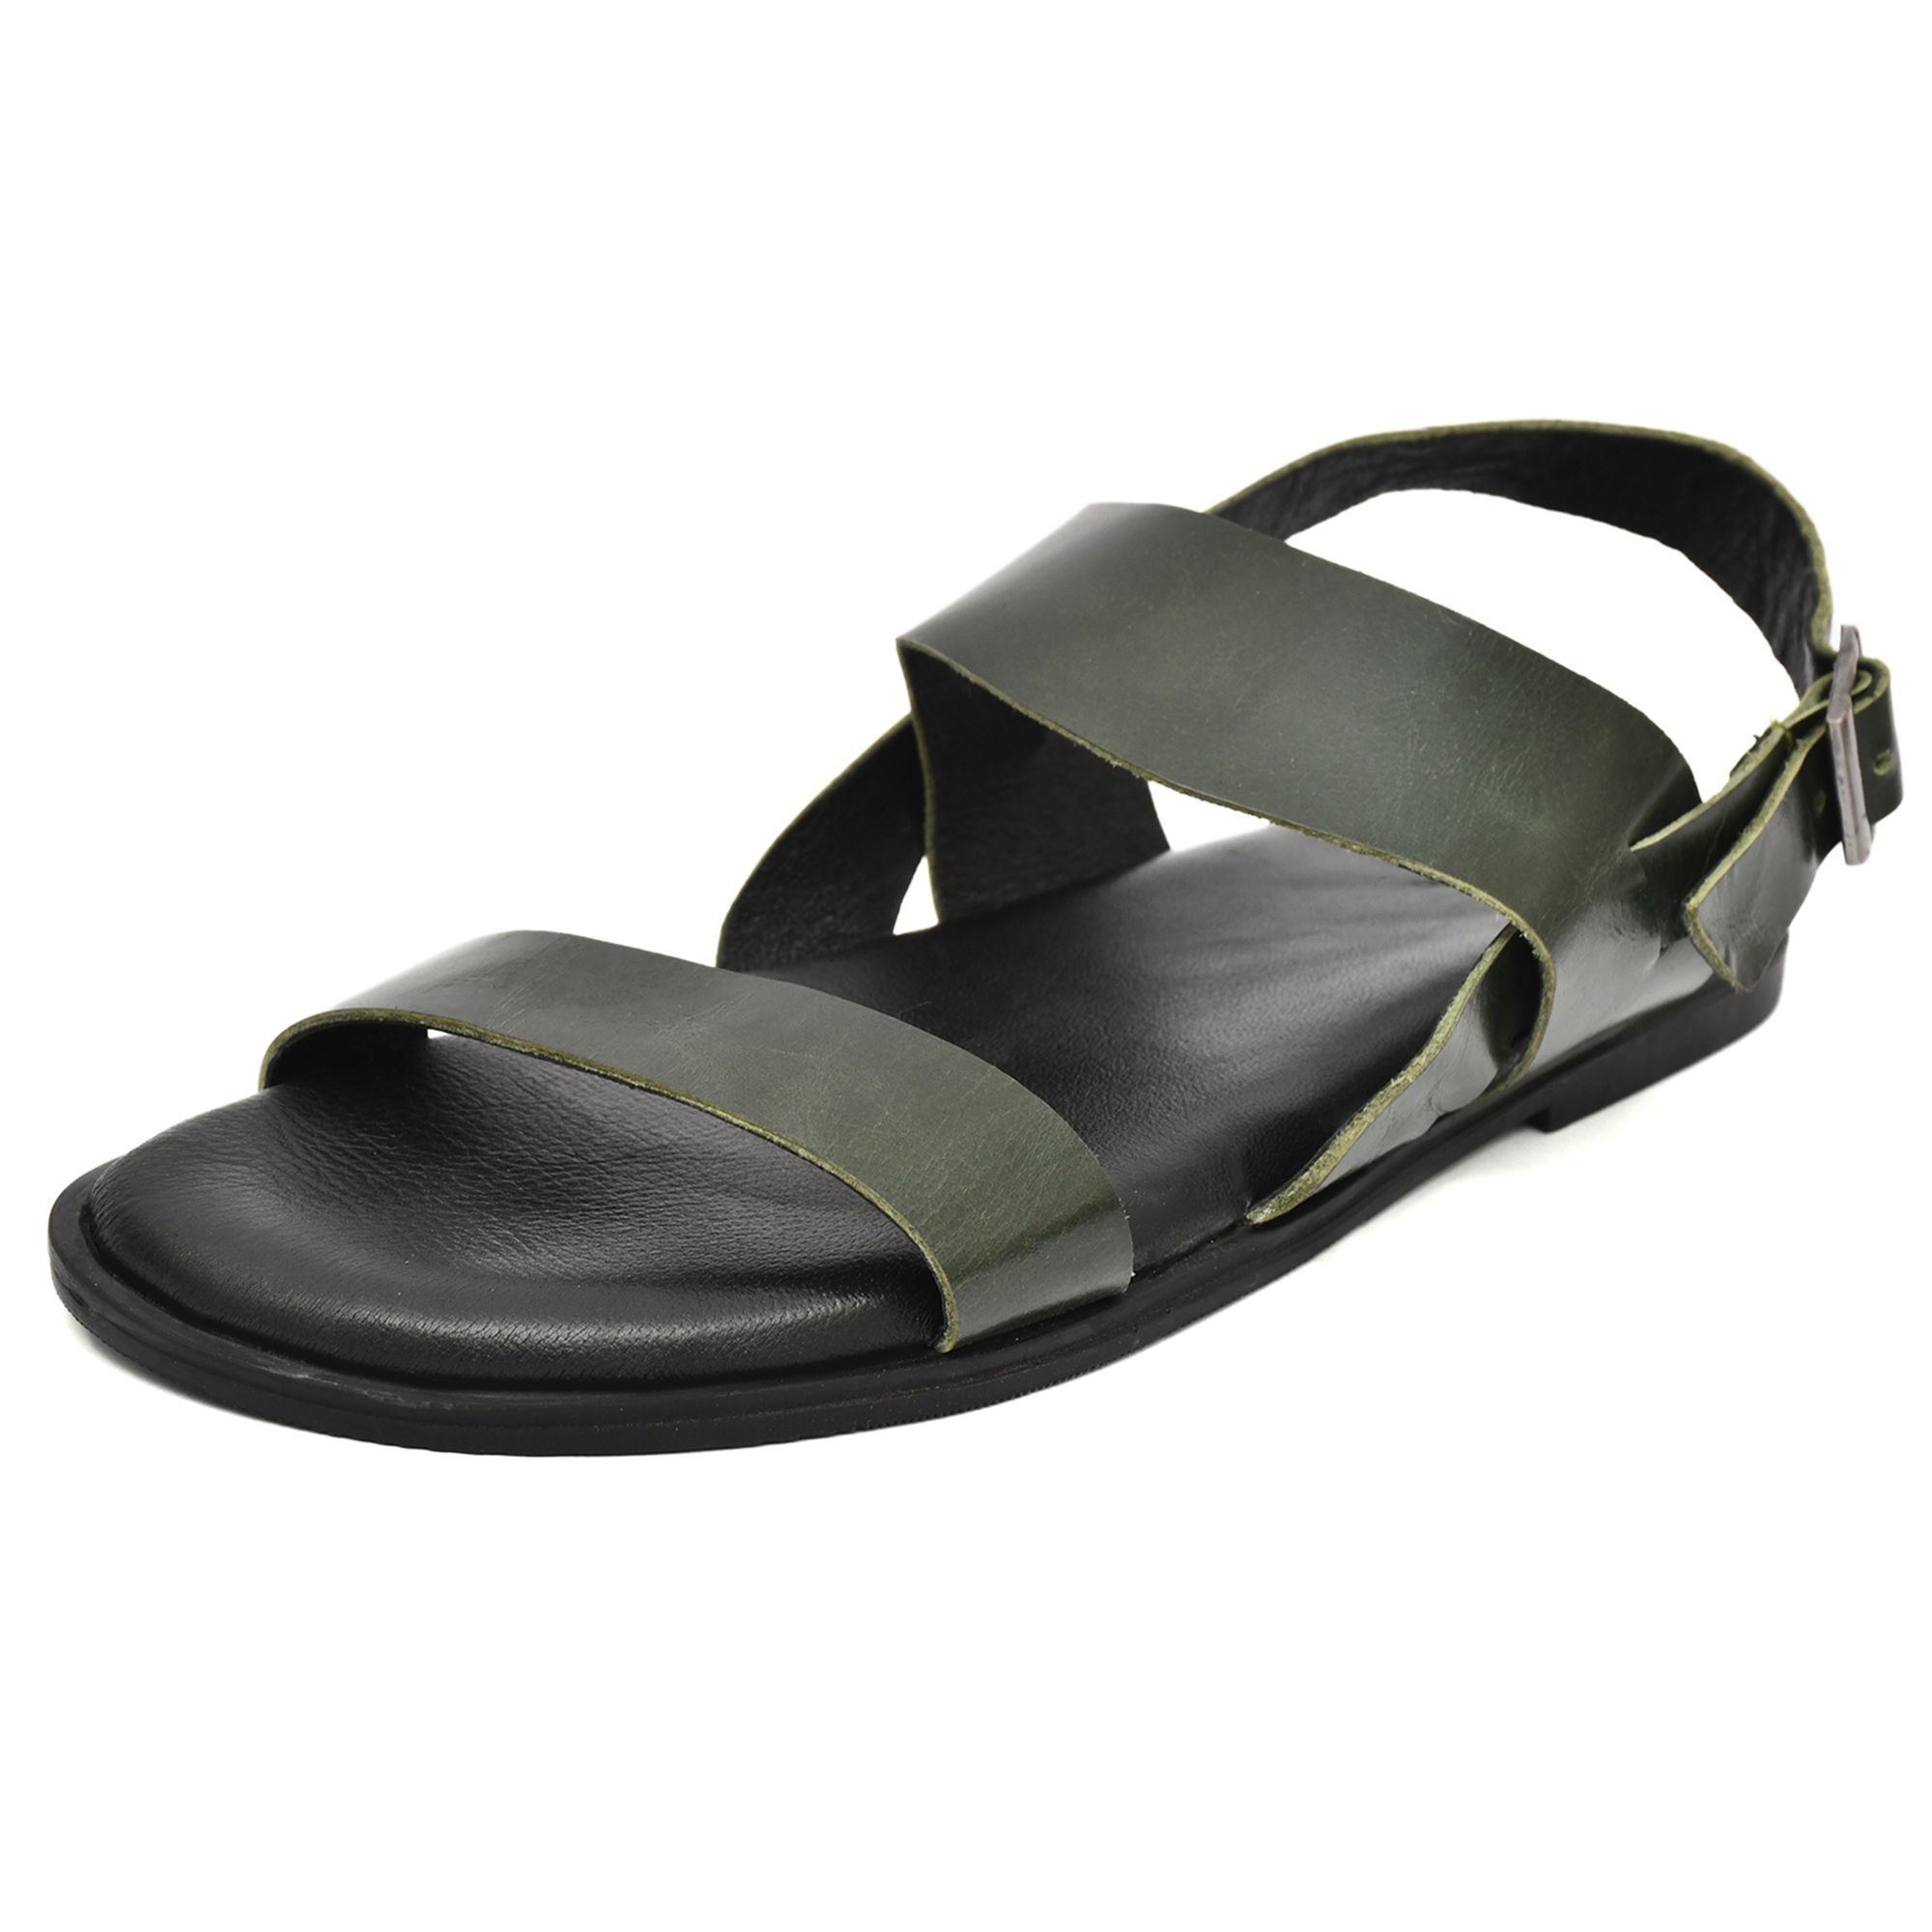 Green Leather Sandals for Mens with Memory foam footpad by asm.